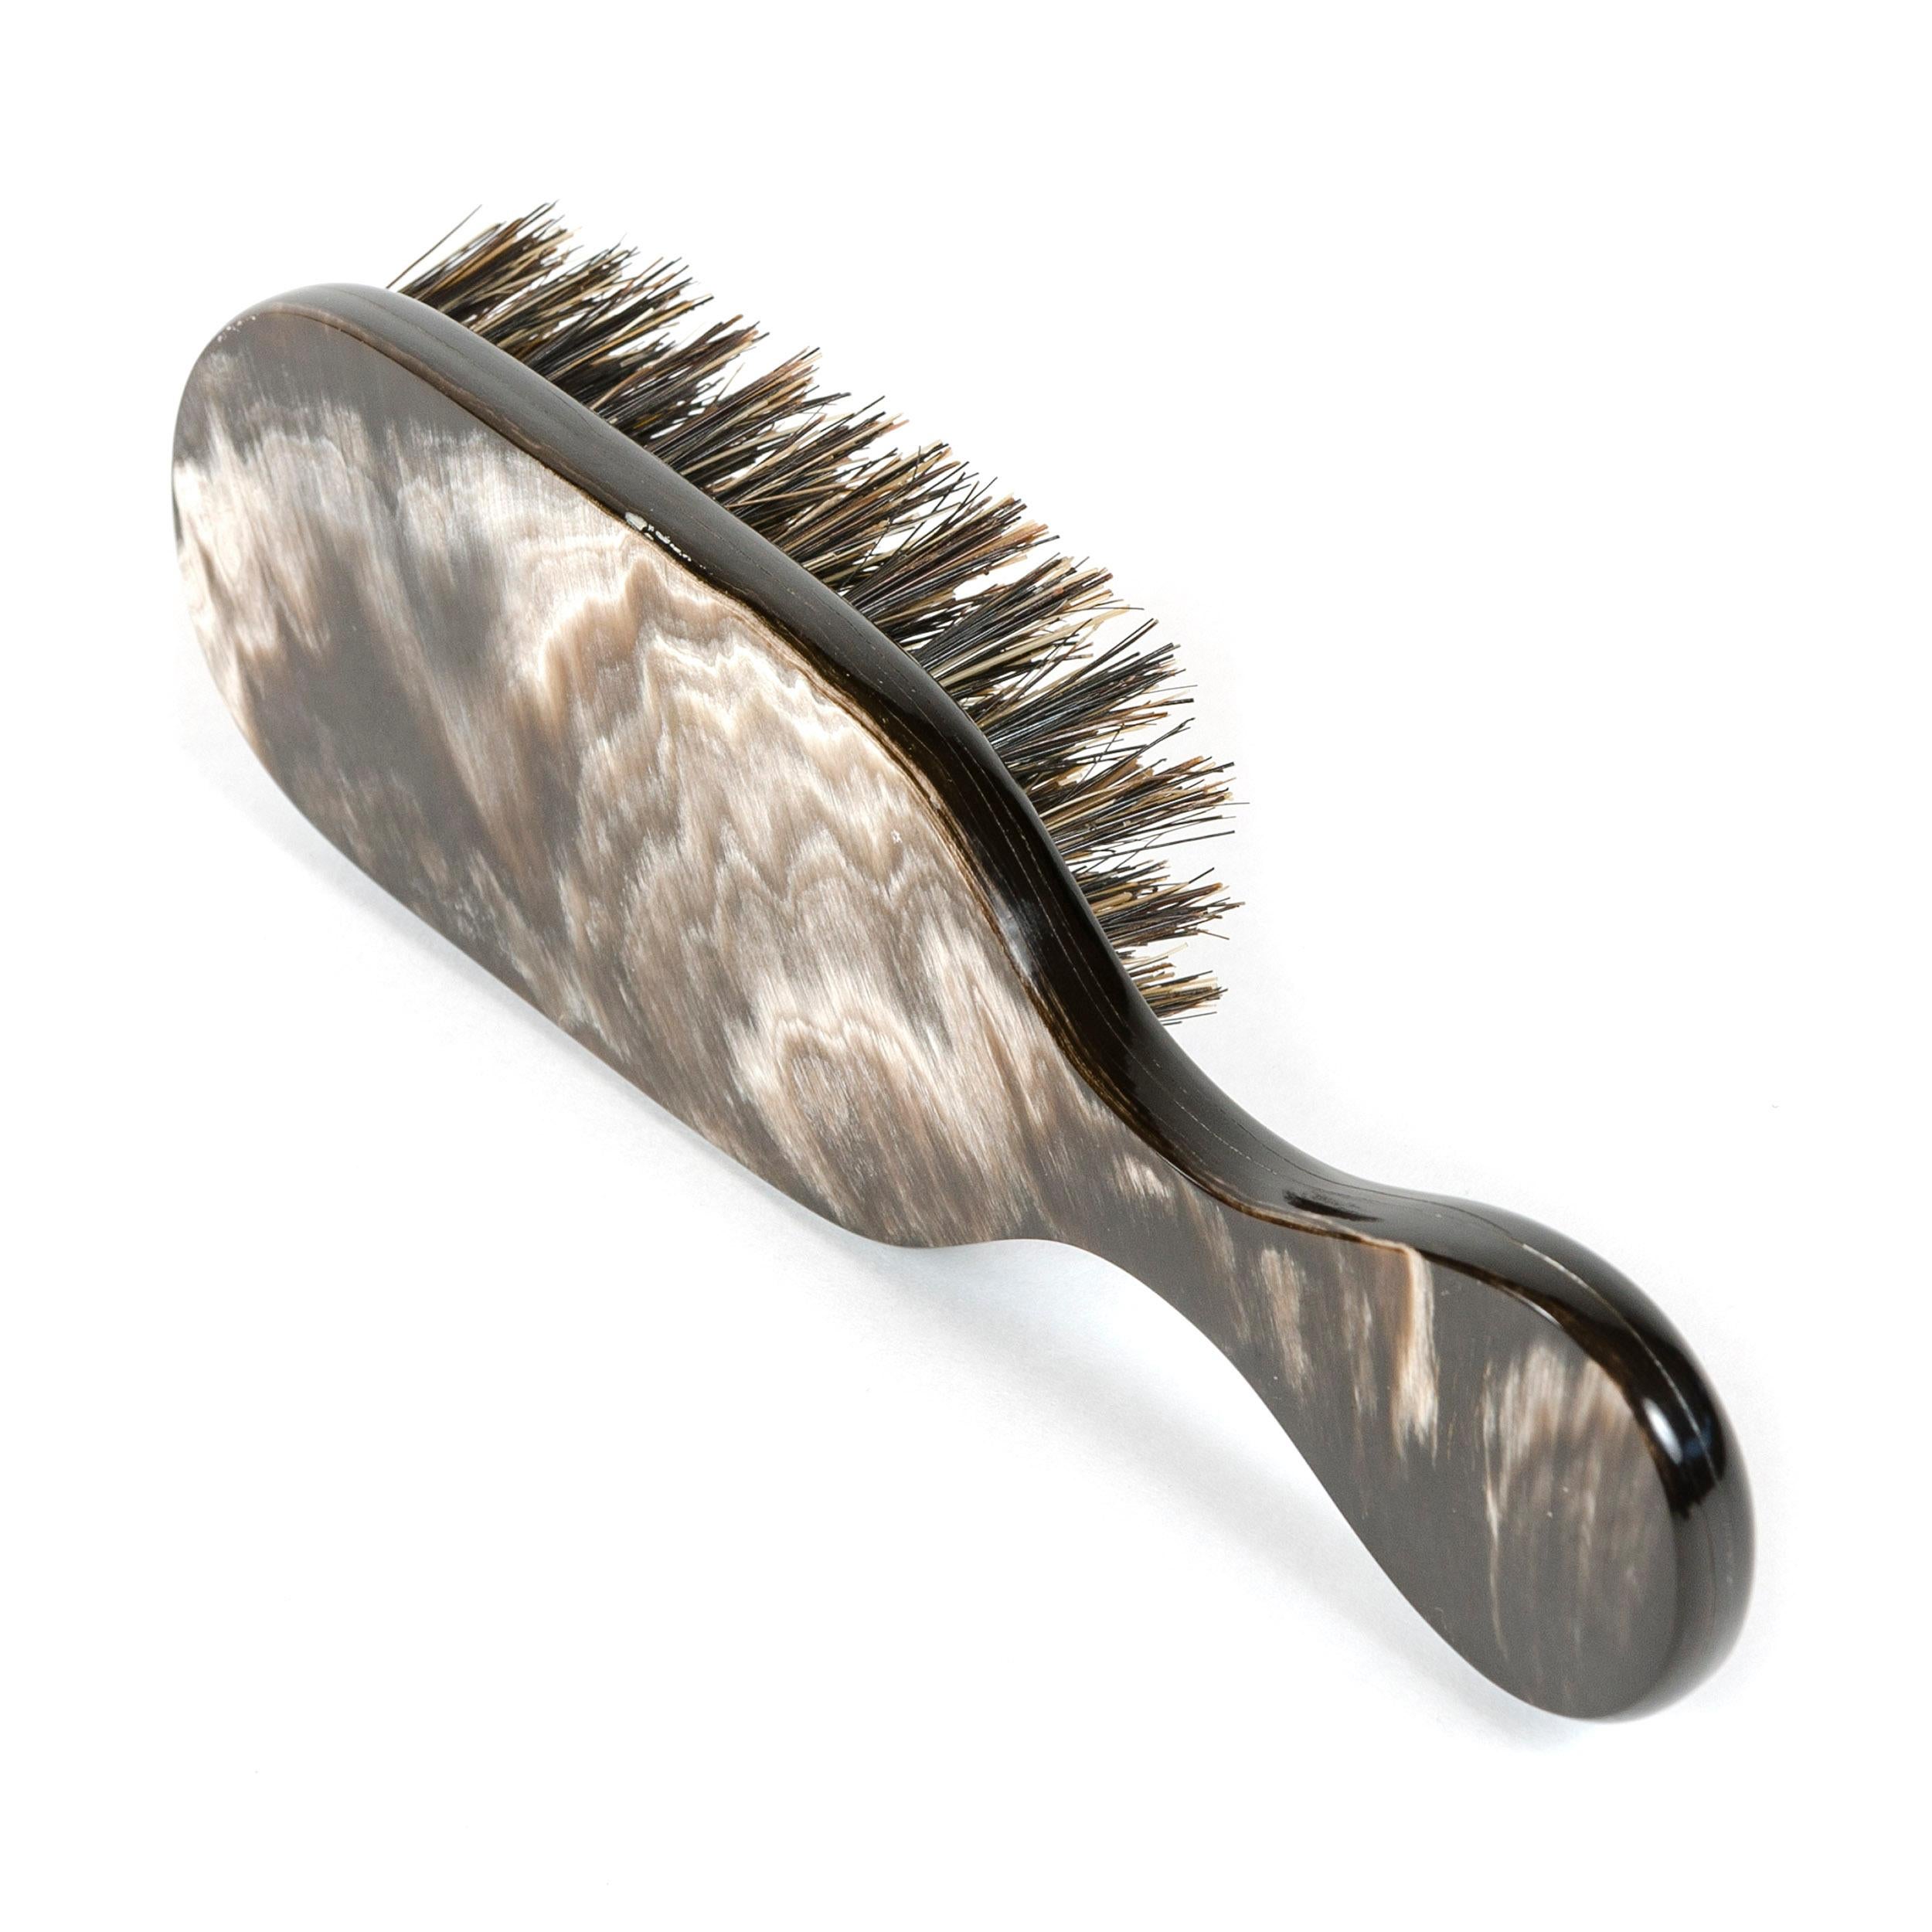 An elegant brush hand carved from cow horn with naturally occurring variations in color and pattern.